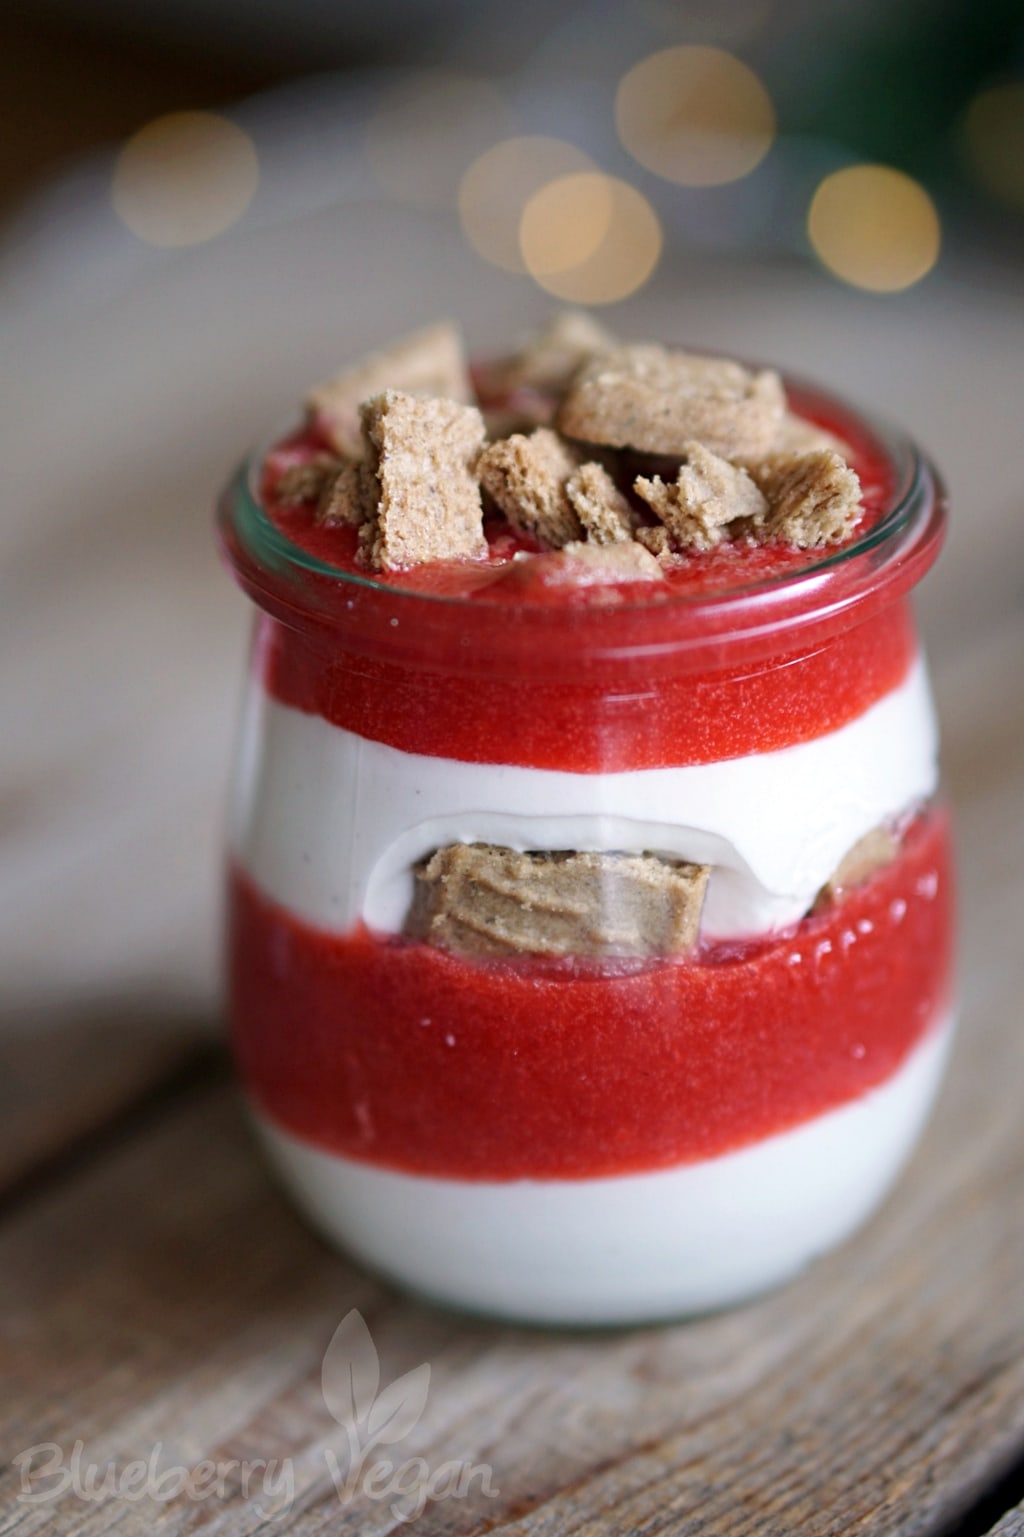 Fruity Speculoos and Strawberry Layered Dessert